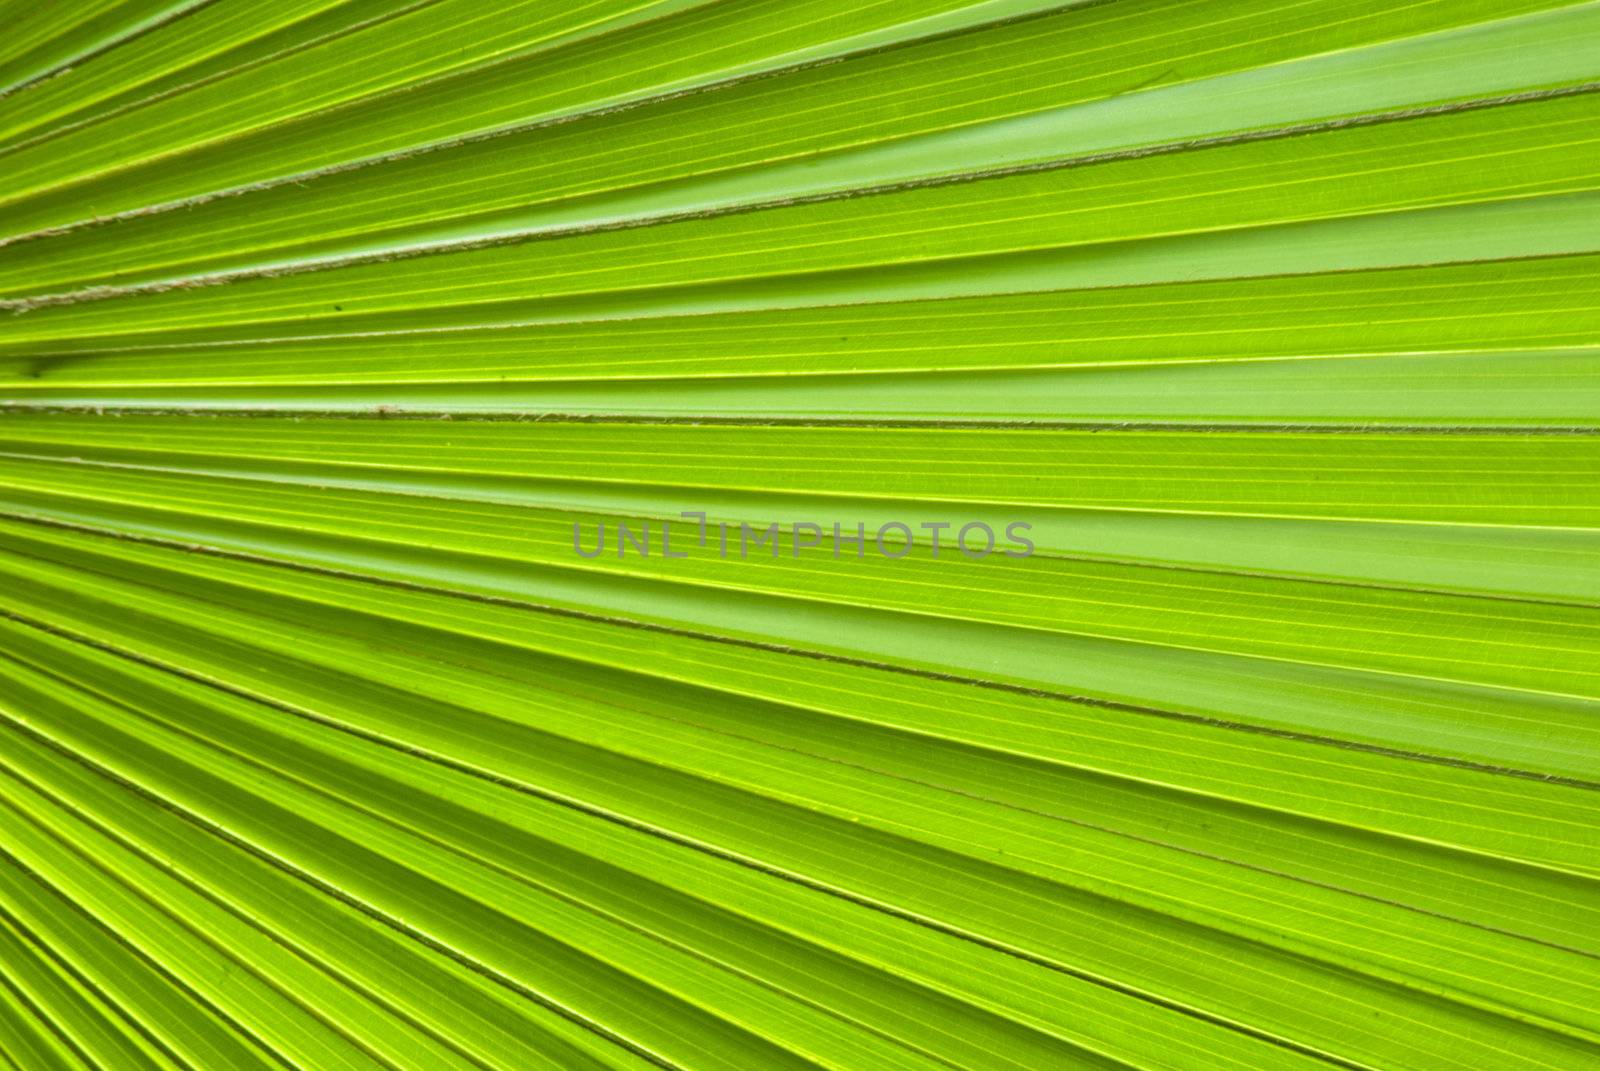 Chusan Palm Leaf section by yuliang11